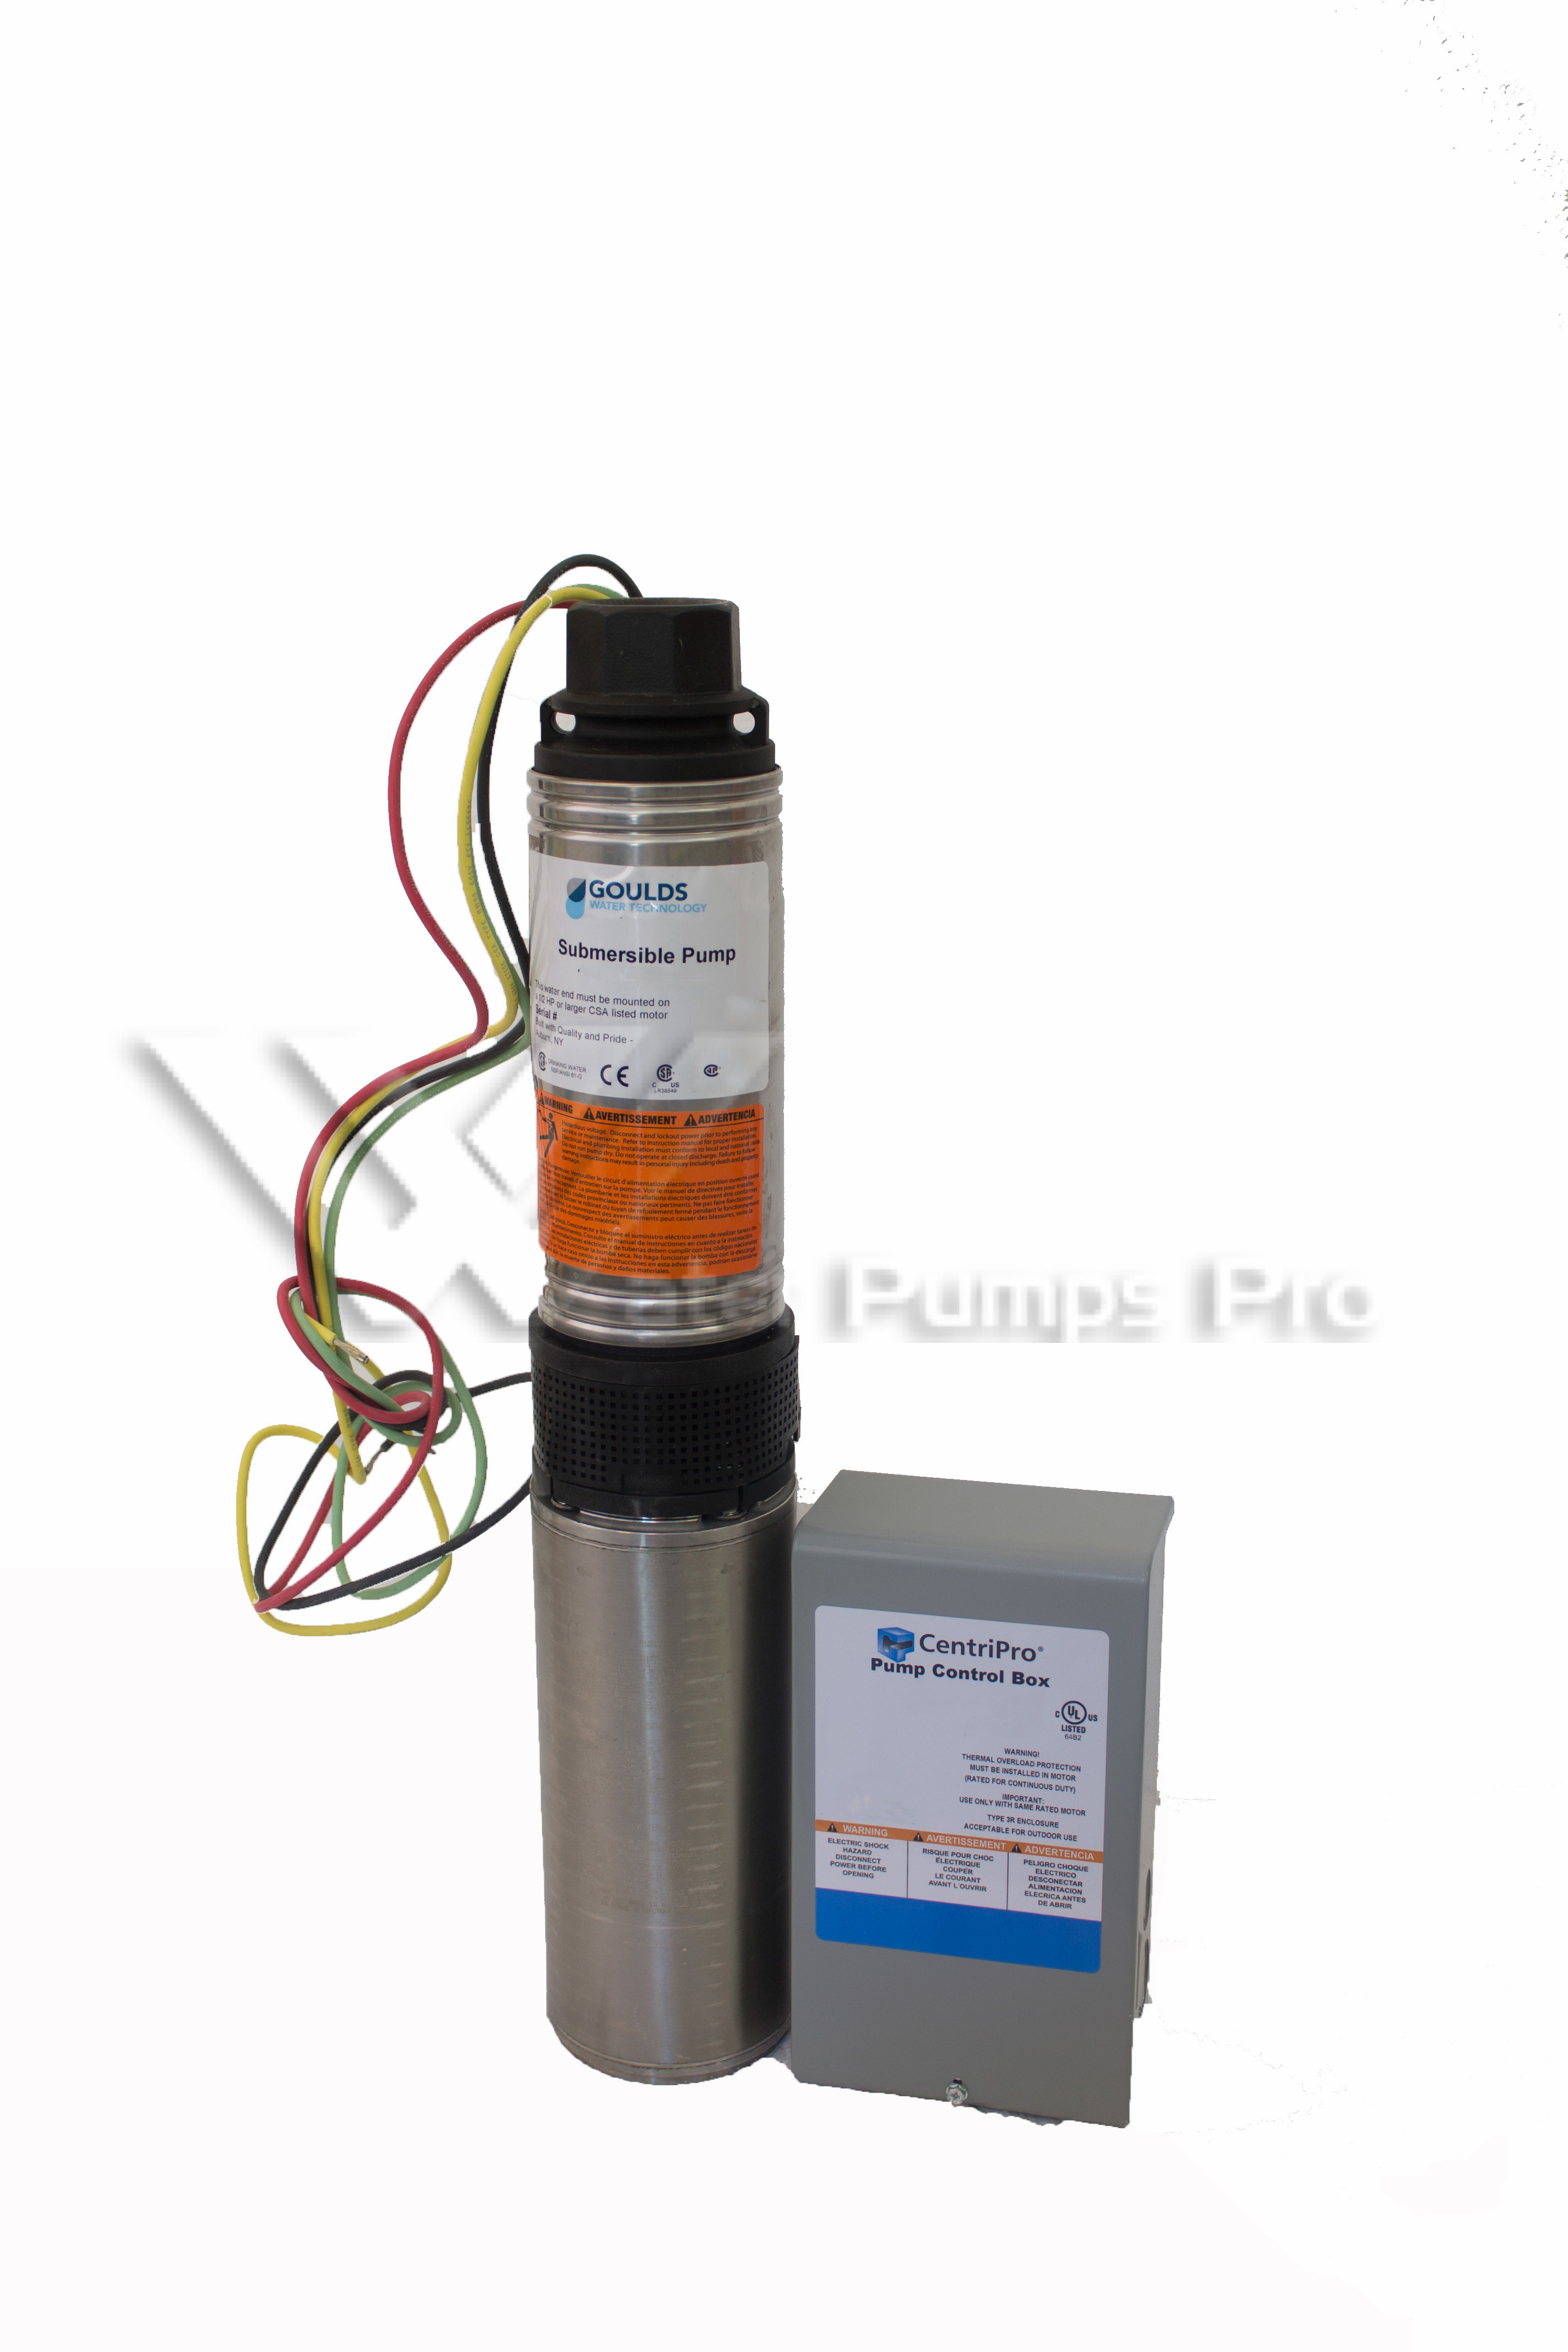 Goulds 10HS05411C Submersible Water Well Pump 1/2HP 115V 3Wire